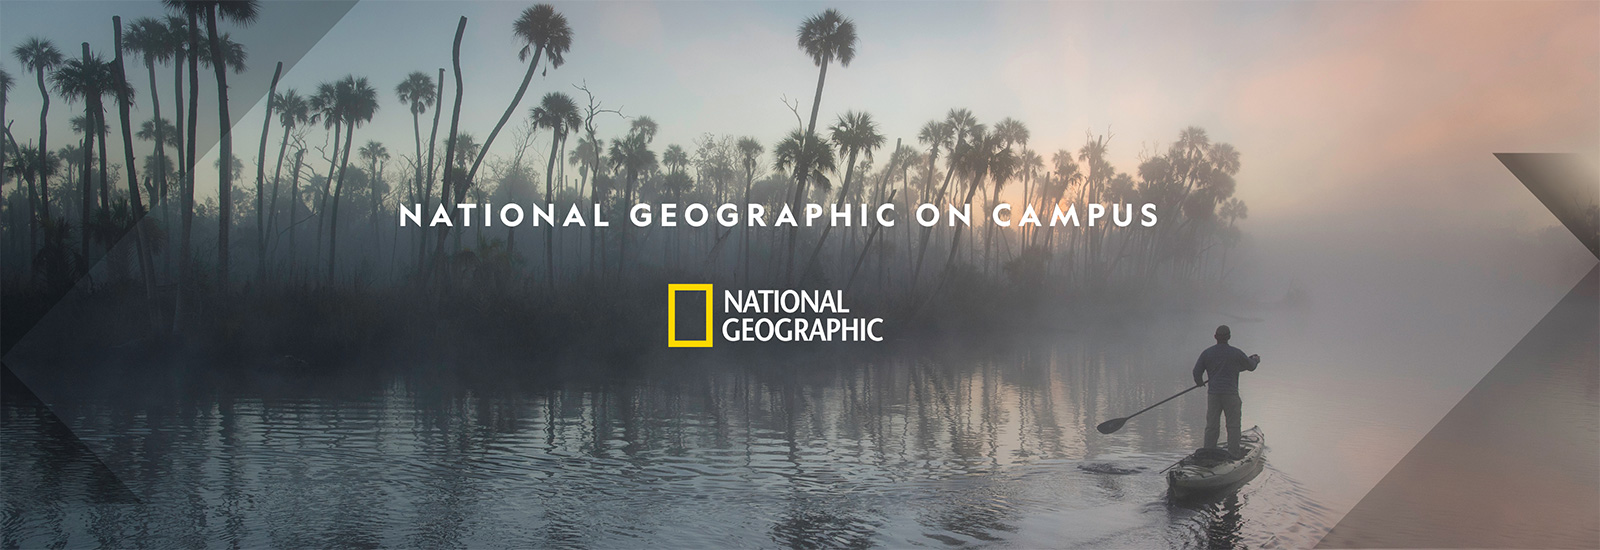 National Geographic on Campus